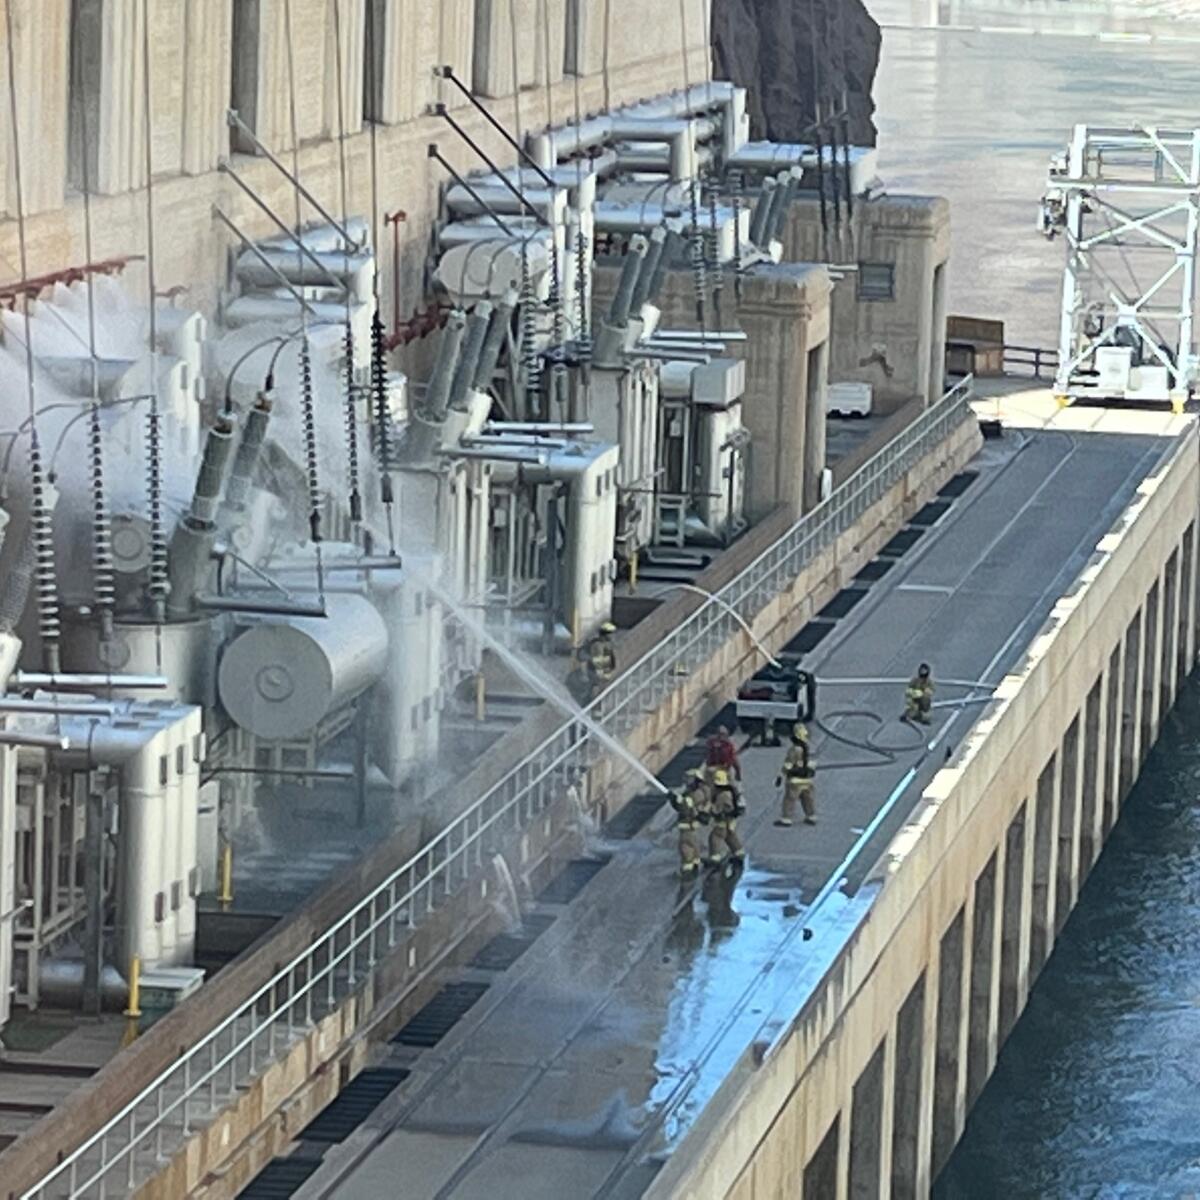 A fire crew puts out flames at the Hoover Dam.